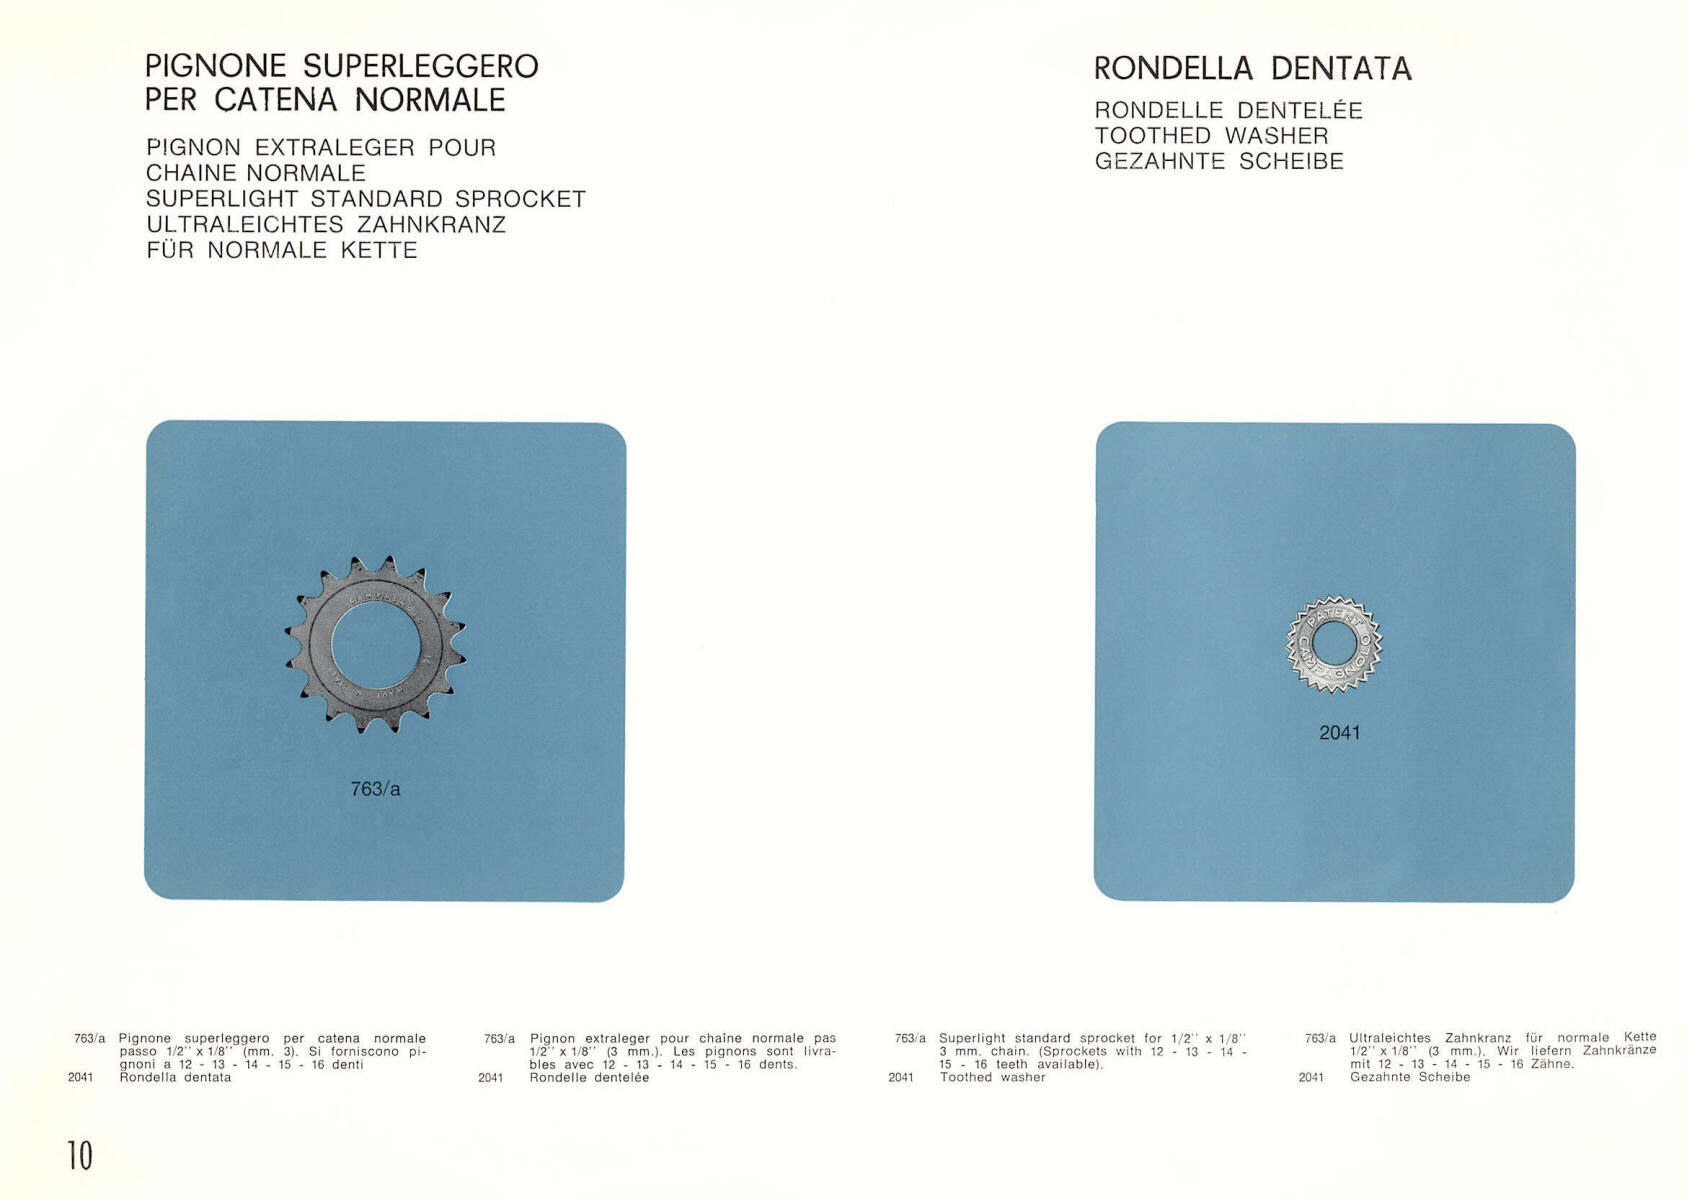 Campagnolo catalog # 16 - supplement (11-1971)